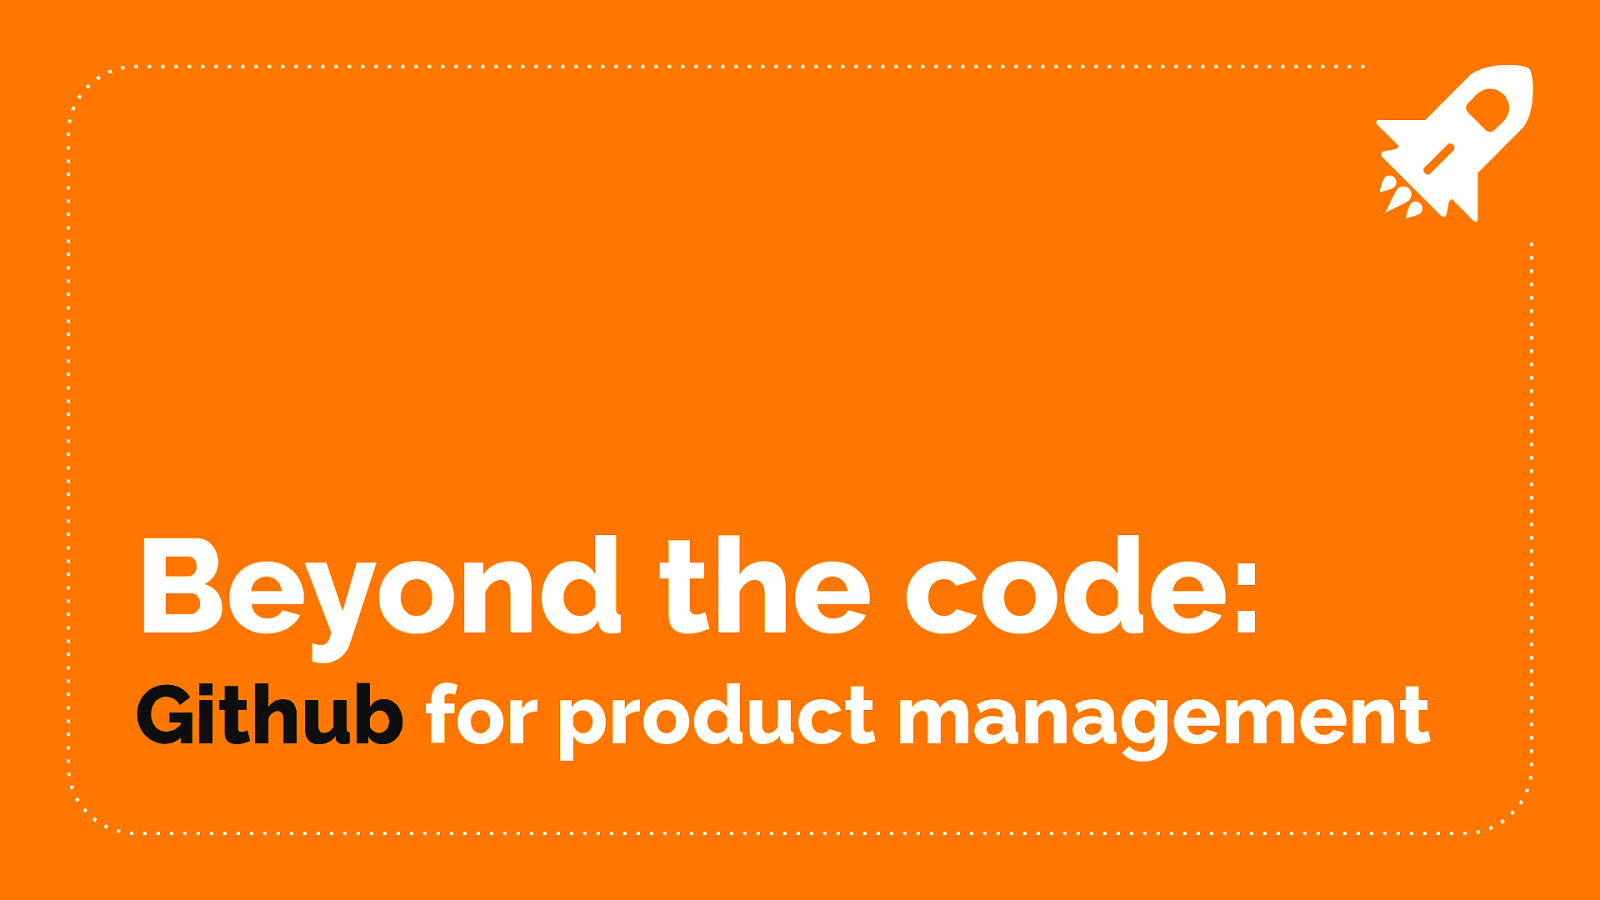 Beyond the code: Github for Product Management